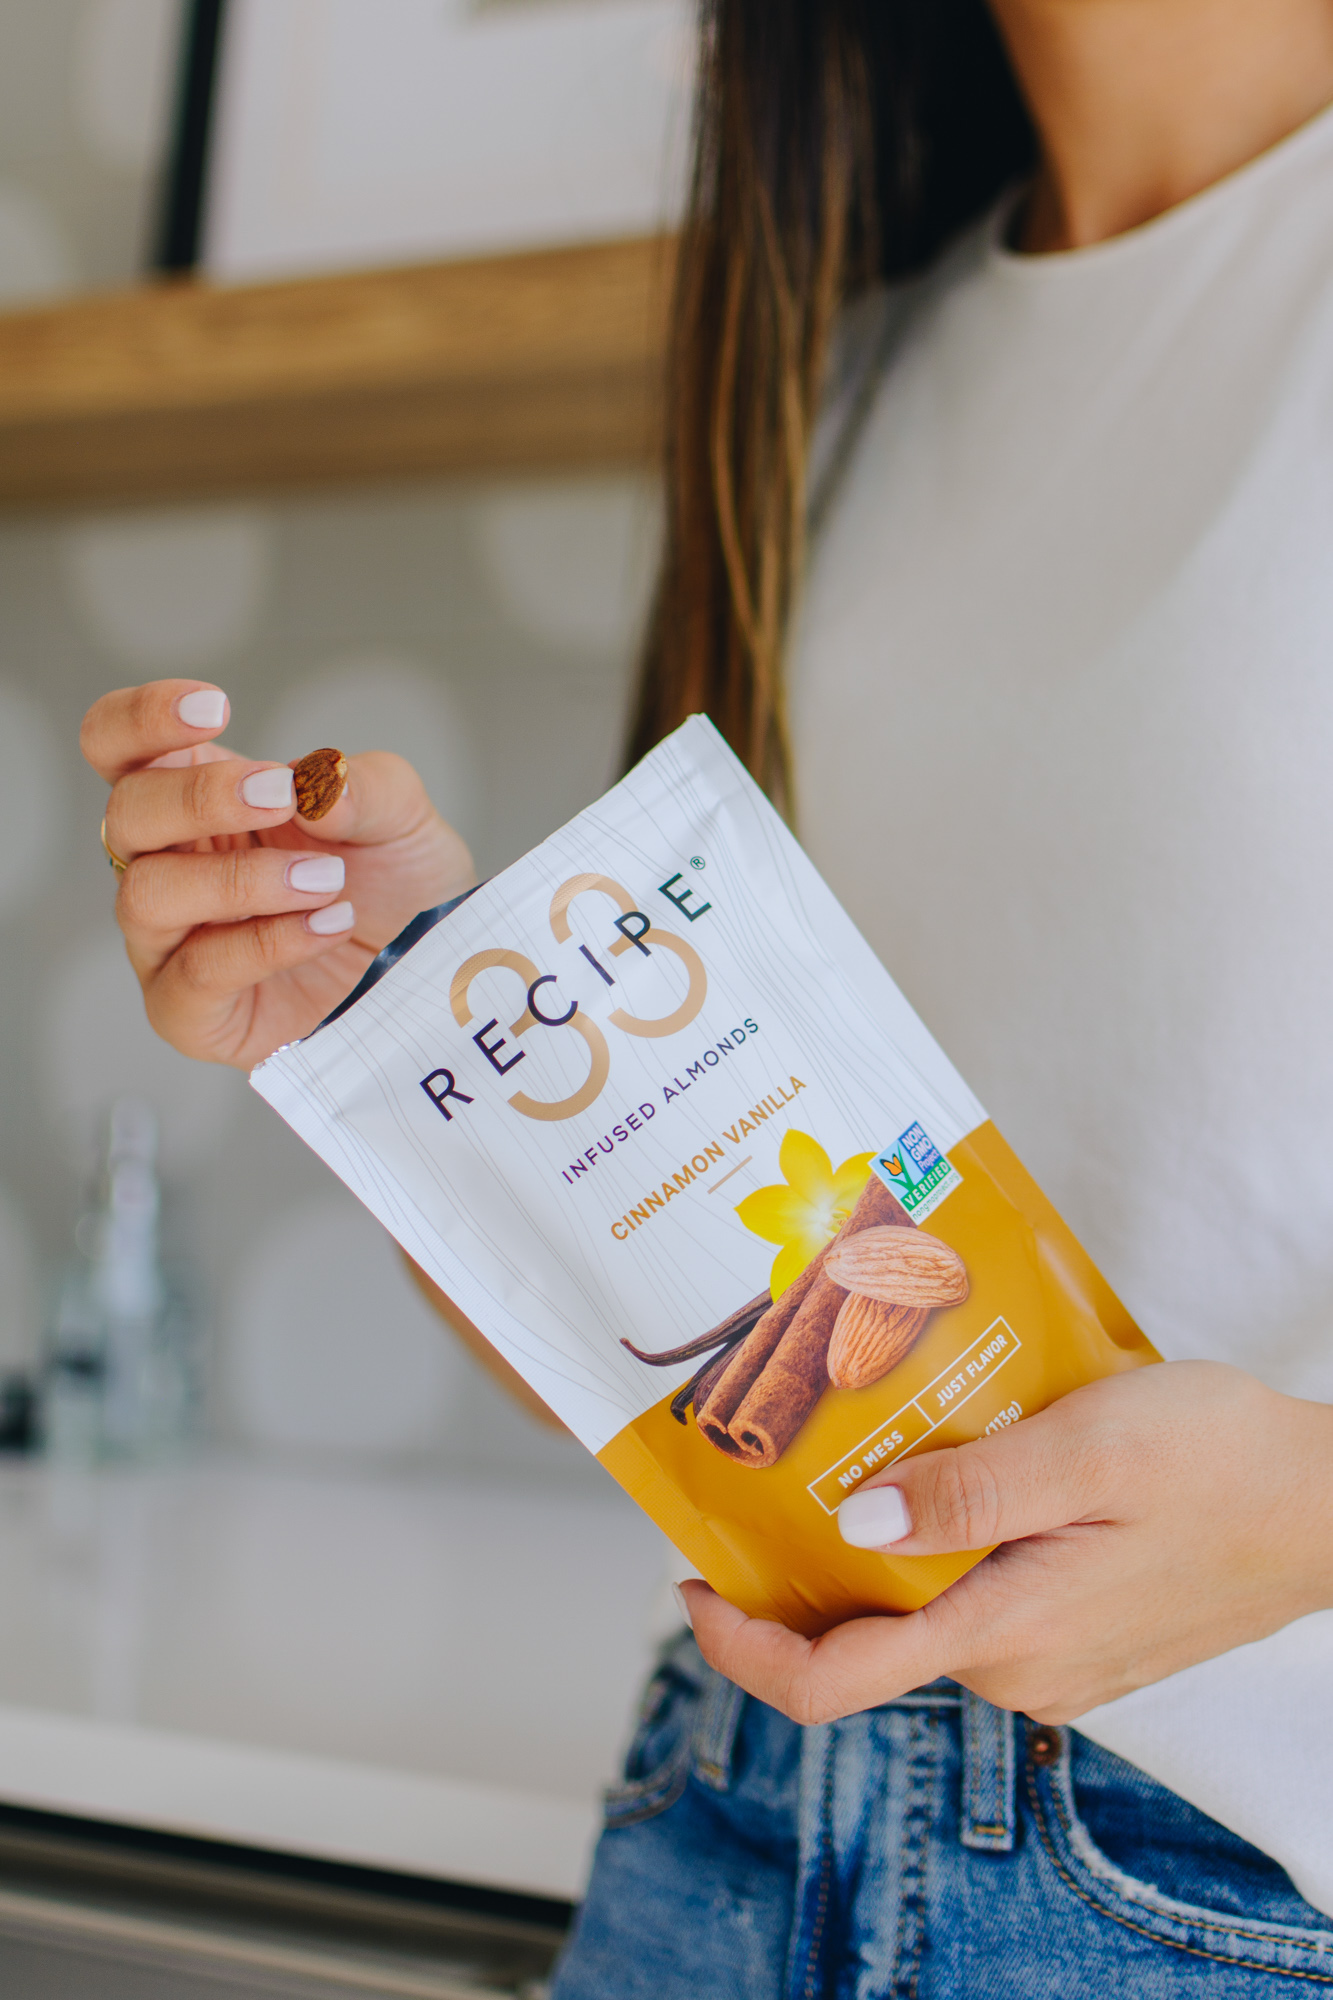 Lifestyle blogger Demi Bang shares mess-free infused almonds snack called Recipe 33 as an easy snack for the summer.